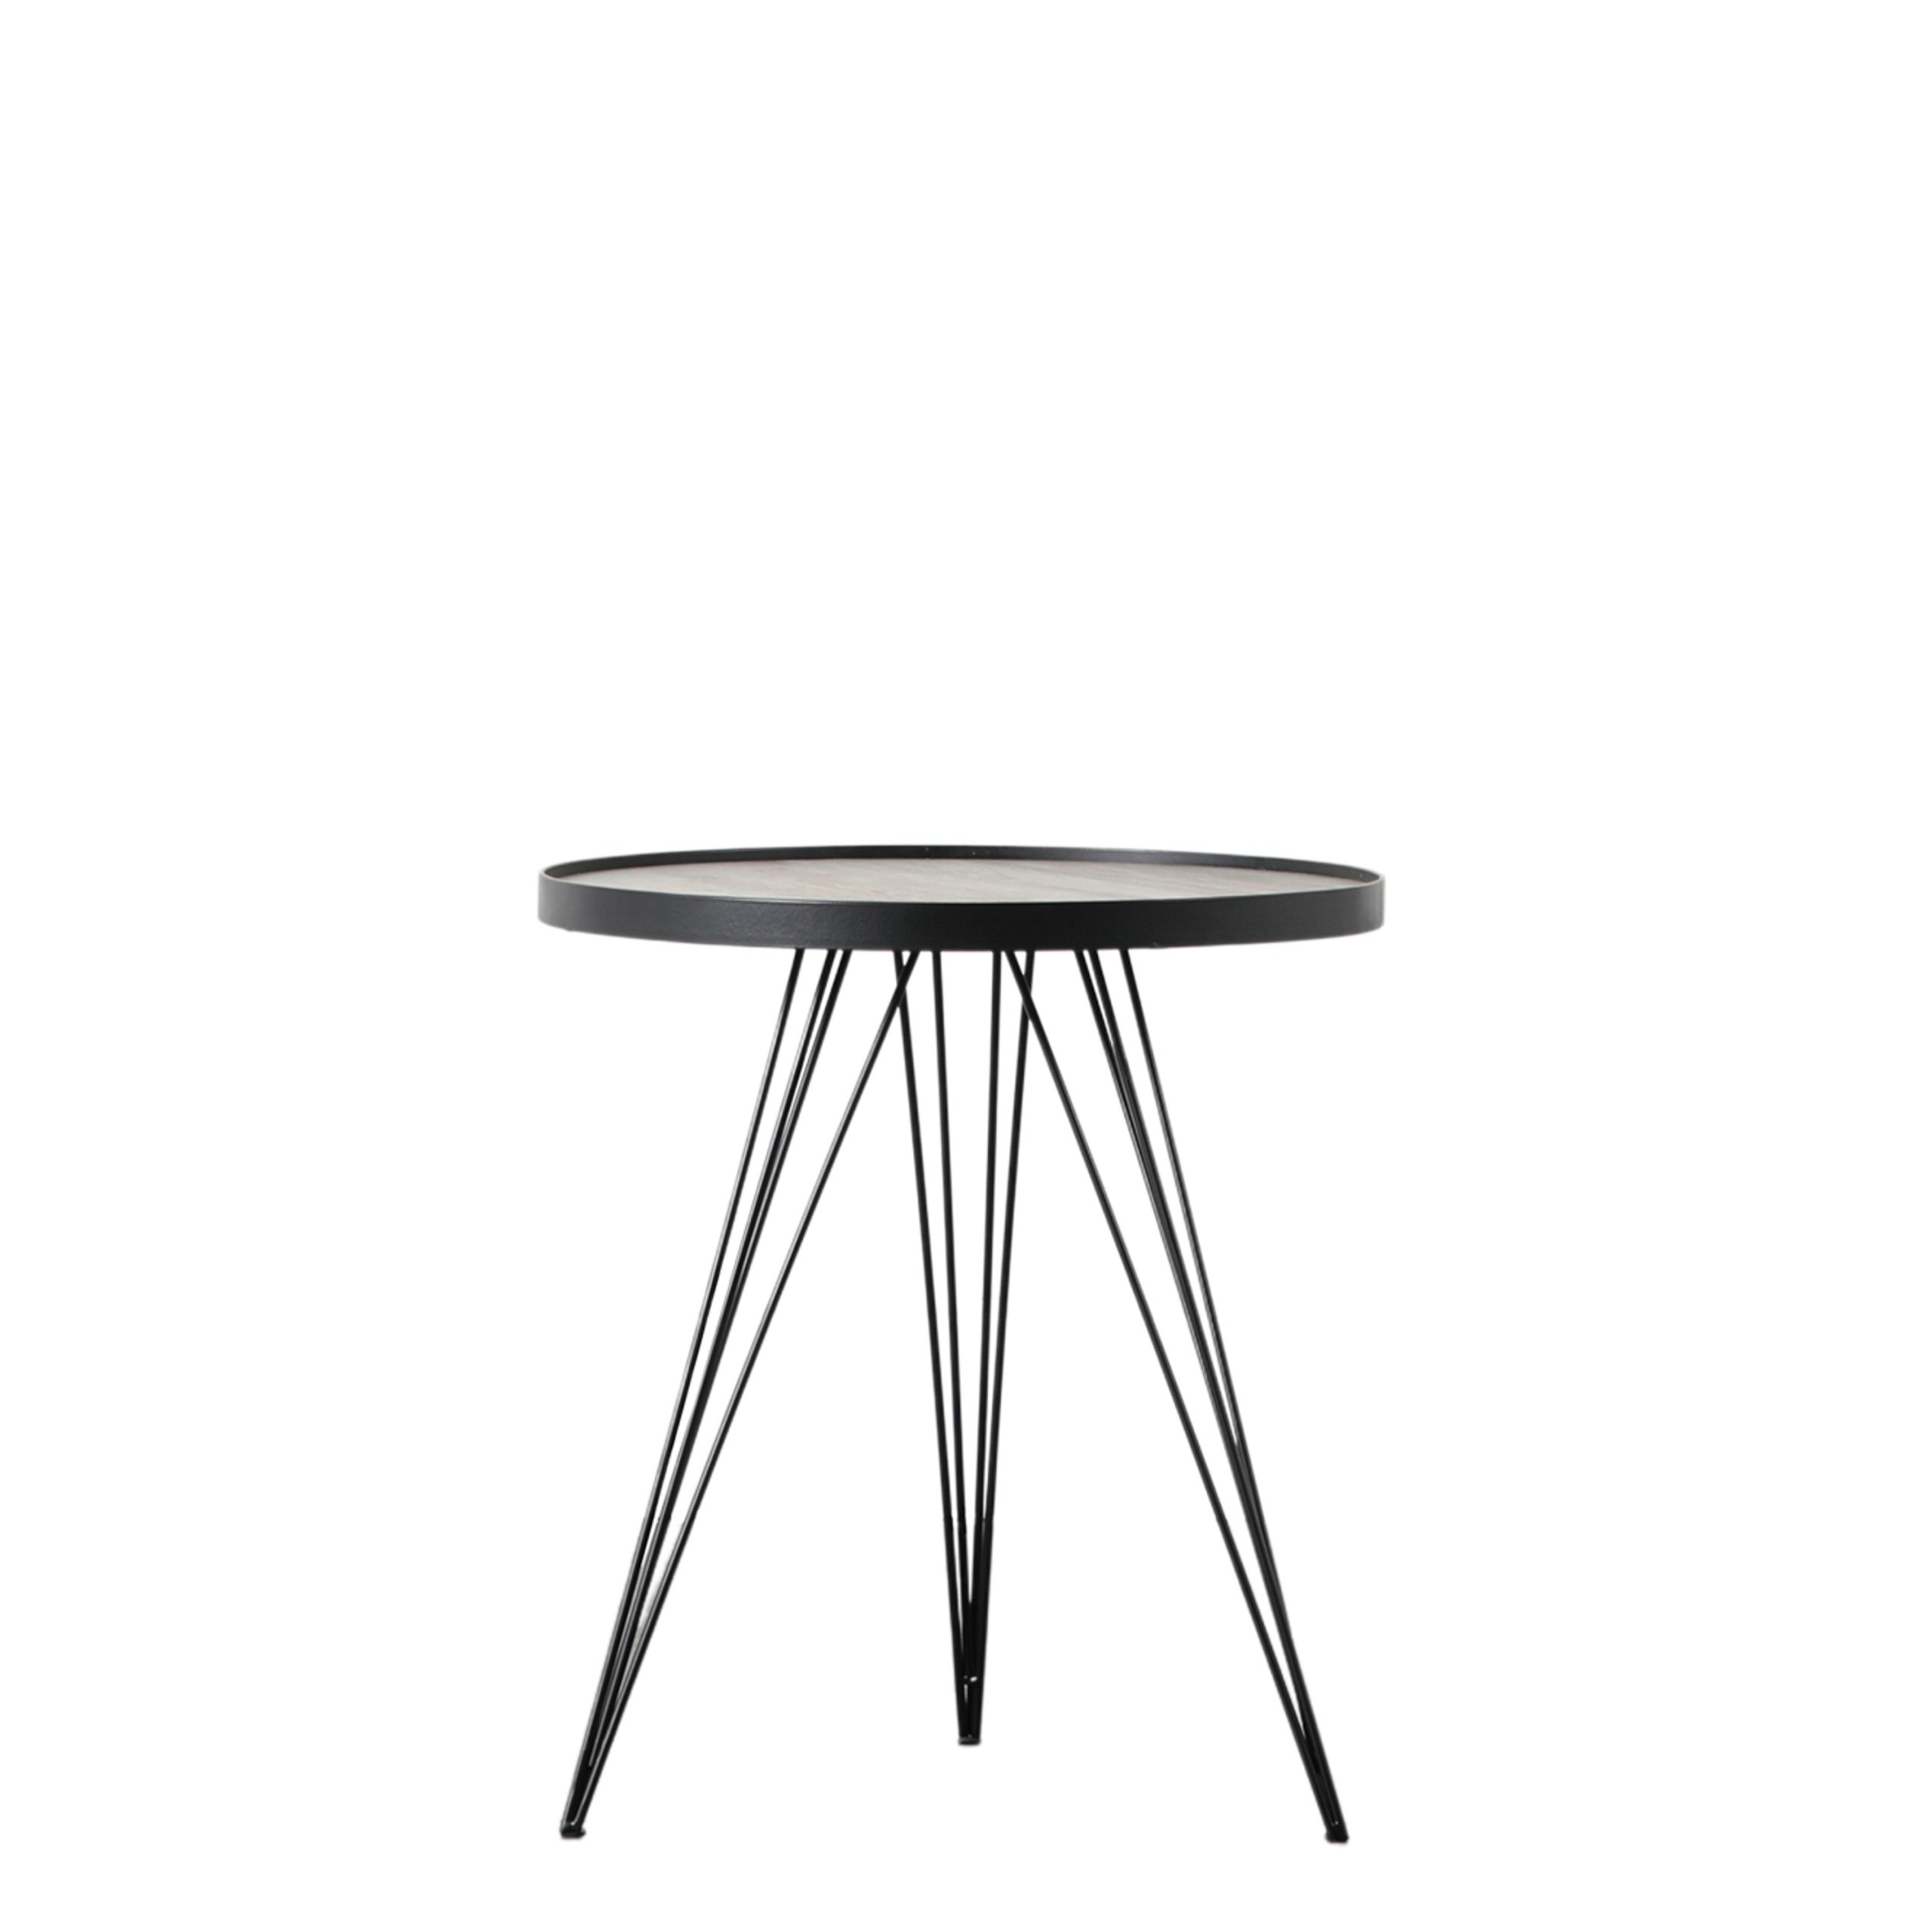 Gallery Direct Tufnell Side Table